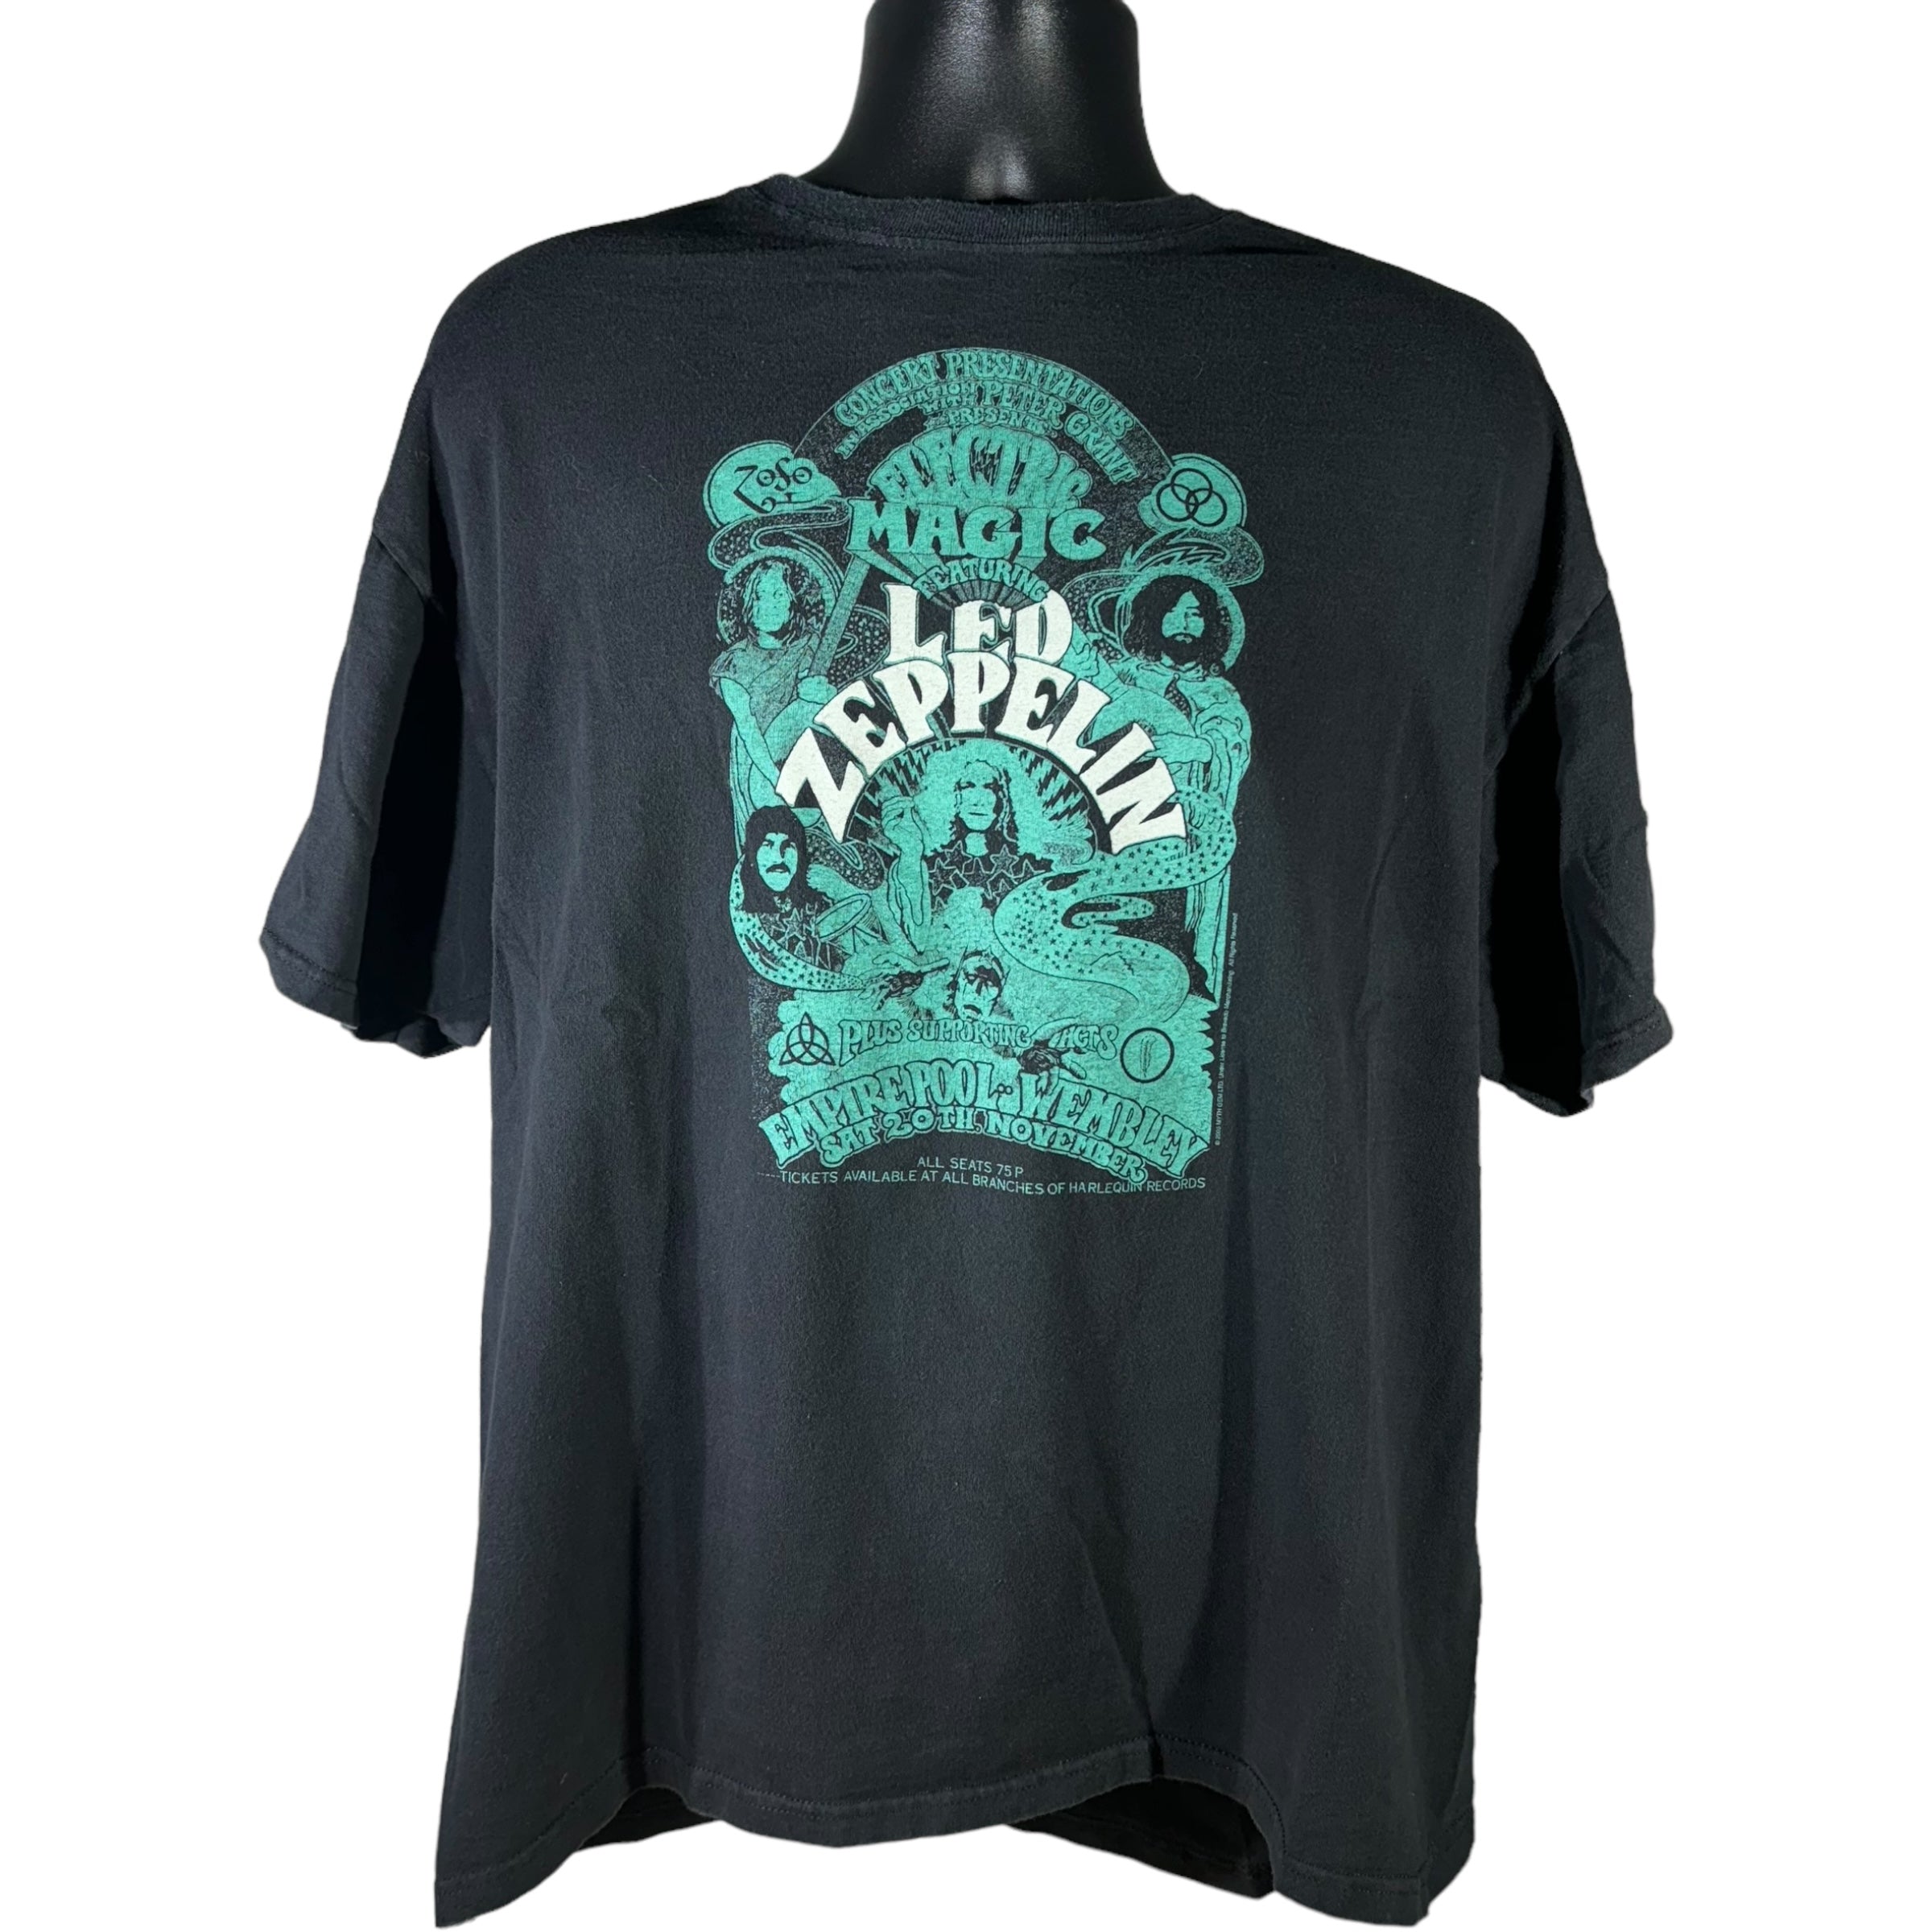 Led Zeppelin "Electric Magic" Band Tee